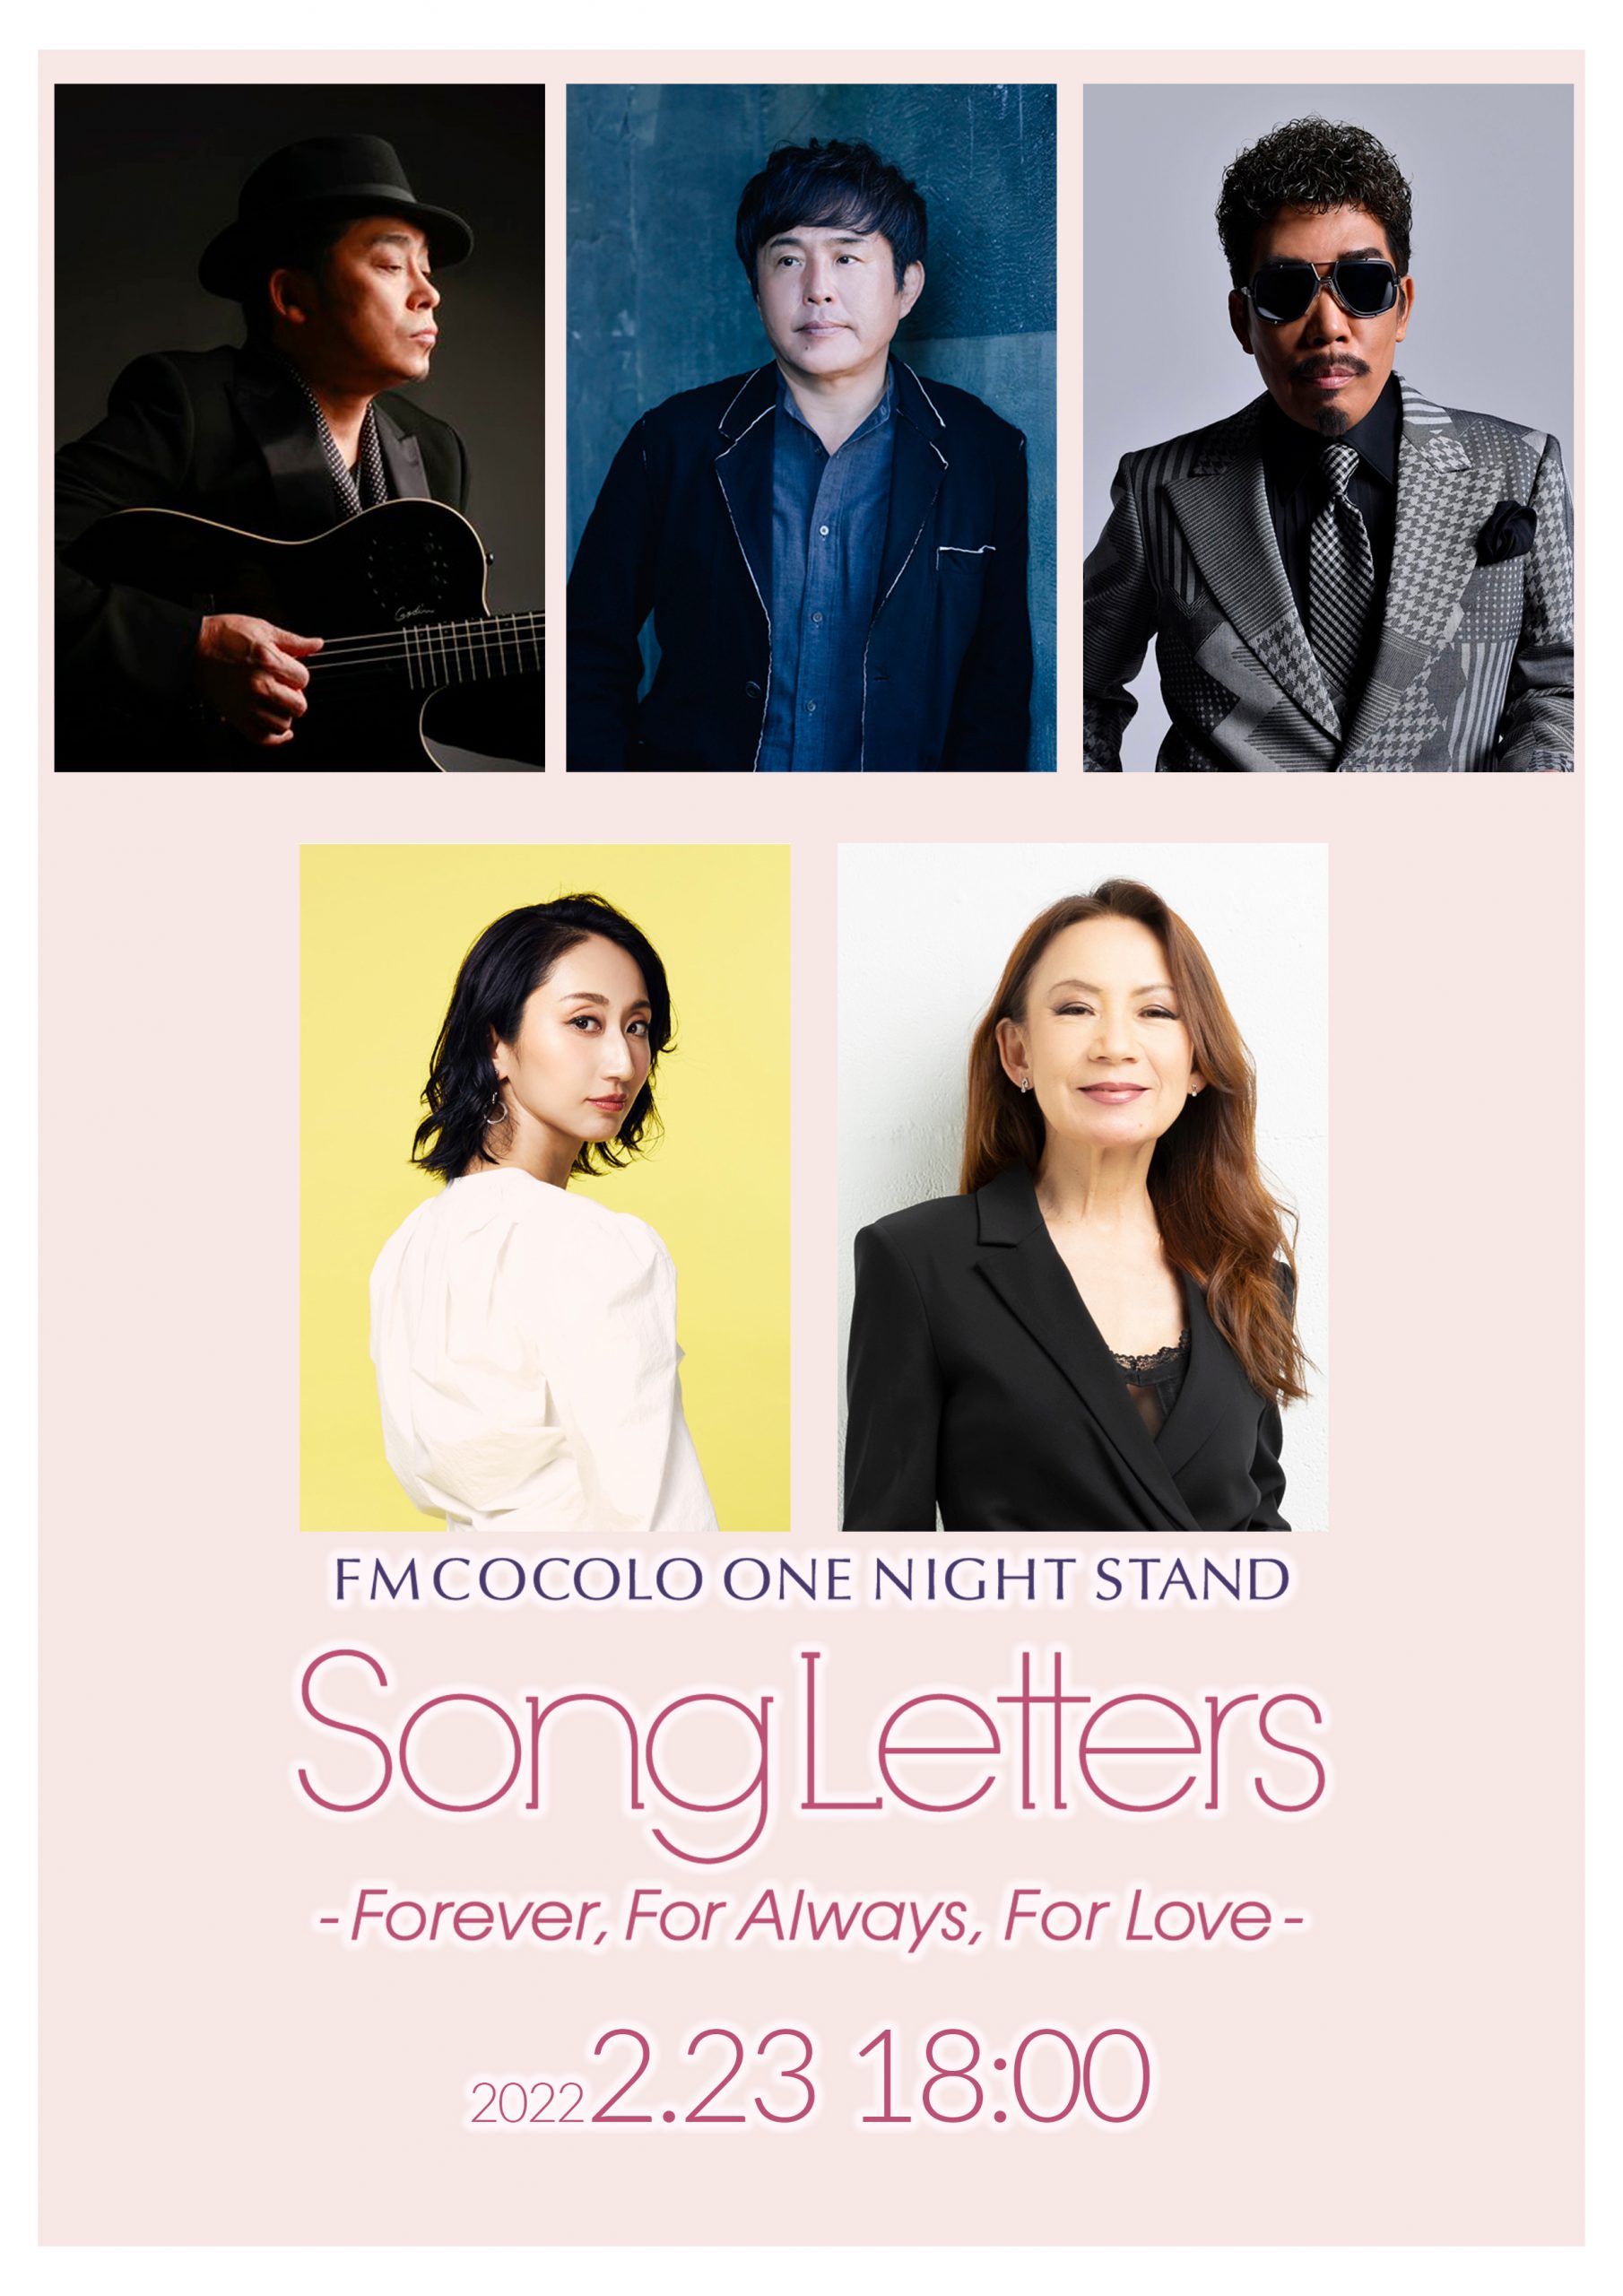 FM COCOLO ONE NIGHT STAND　SongLetters　-Forever,For Always,For Love-